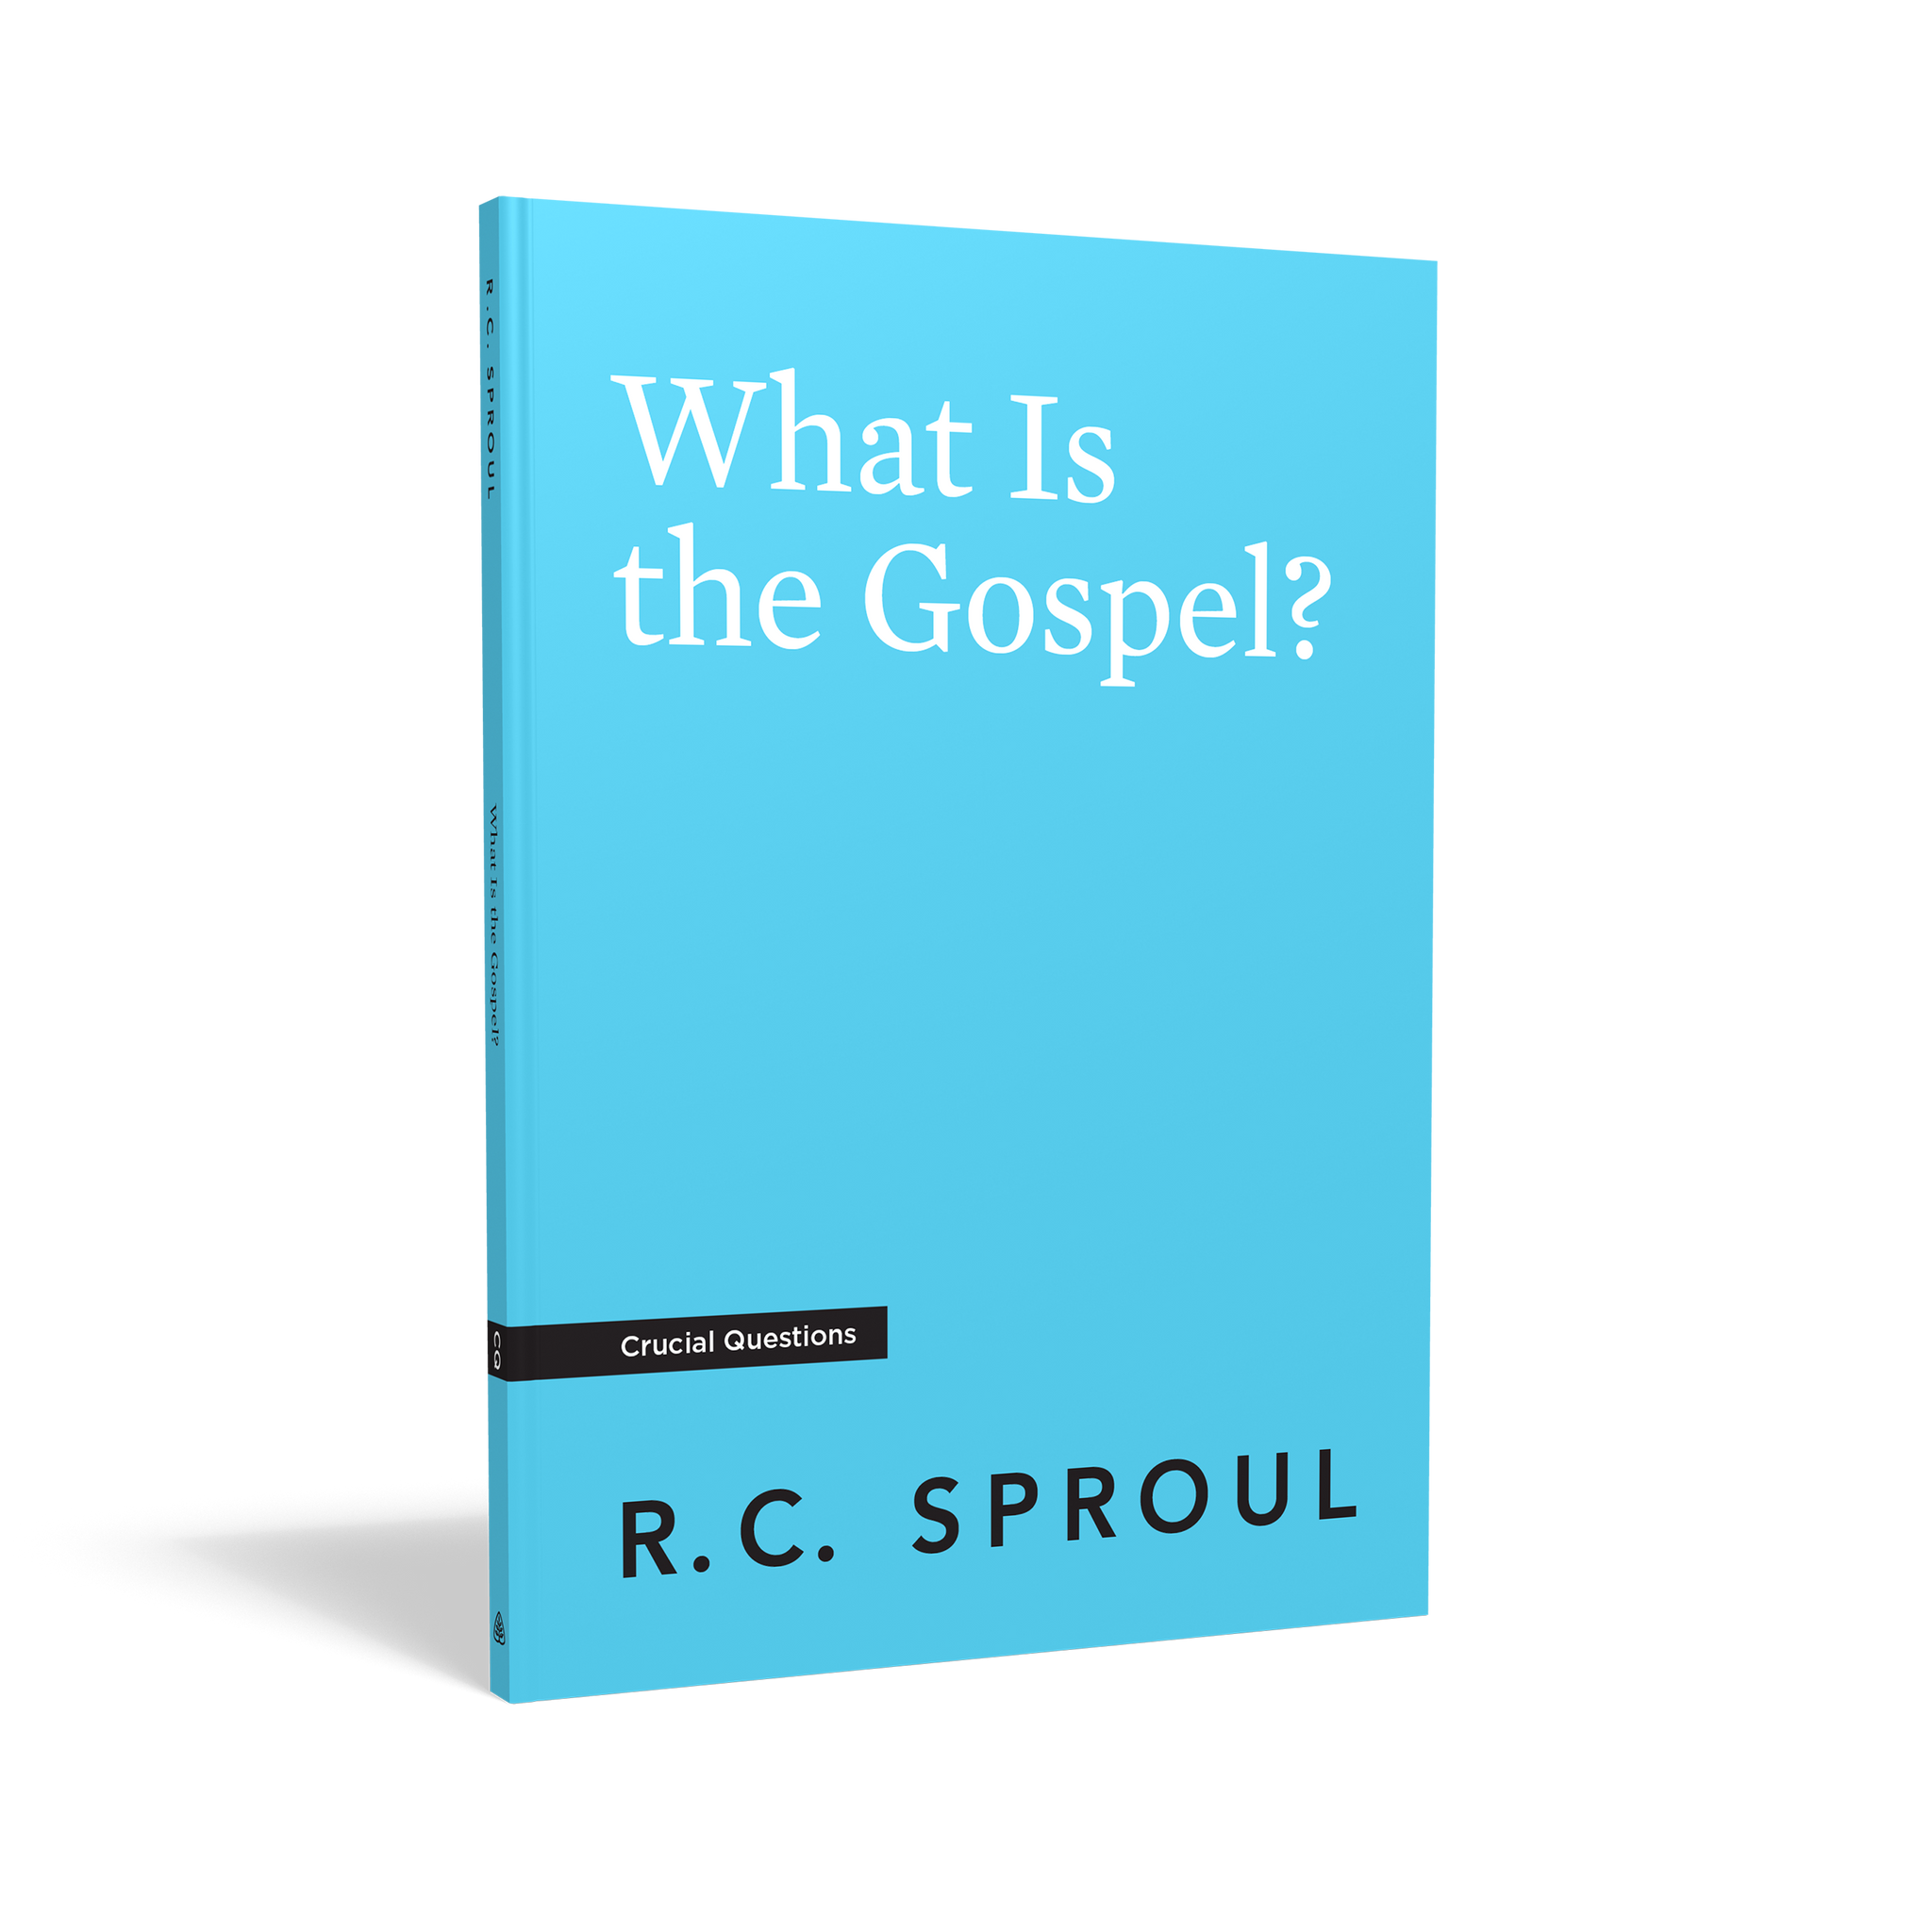 Crucial Questions - What Is the Gospel?